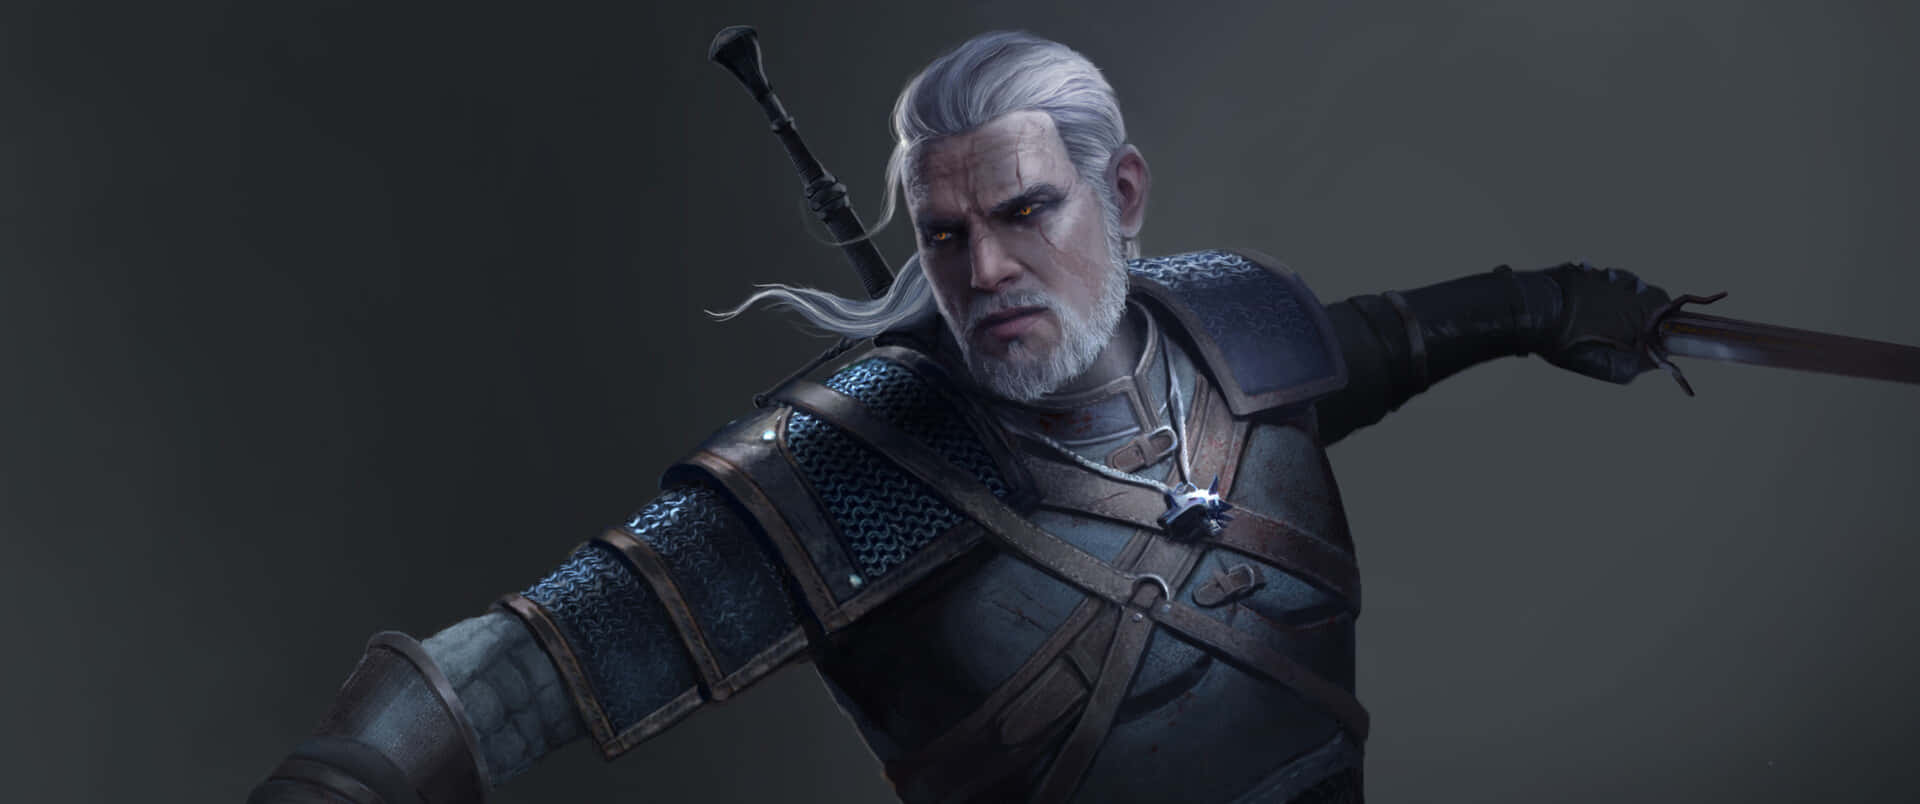 Geralt of Rivia, the witcher protagonist of the popular video game series The Witcher, in all his glory. Wallpaper